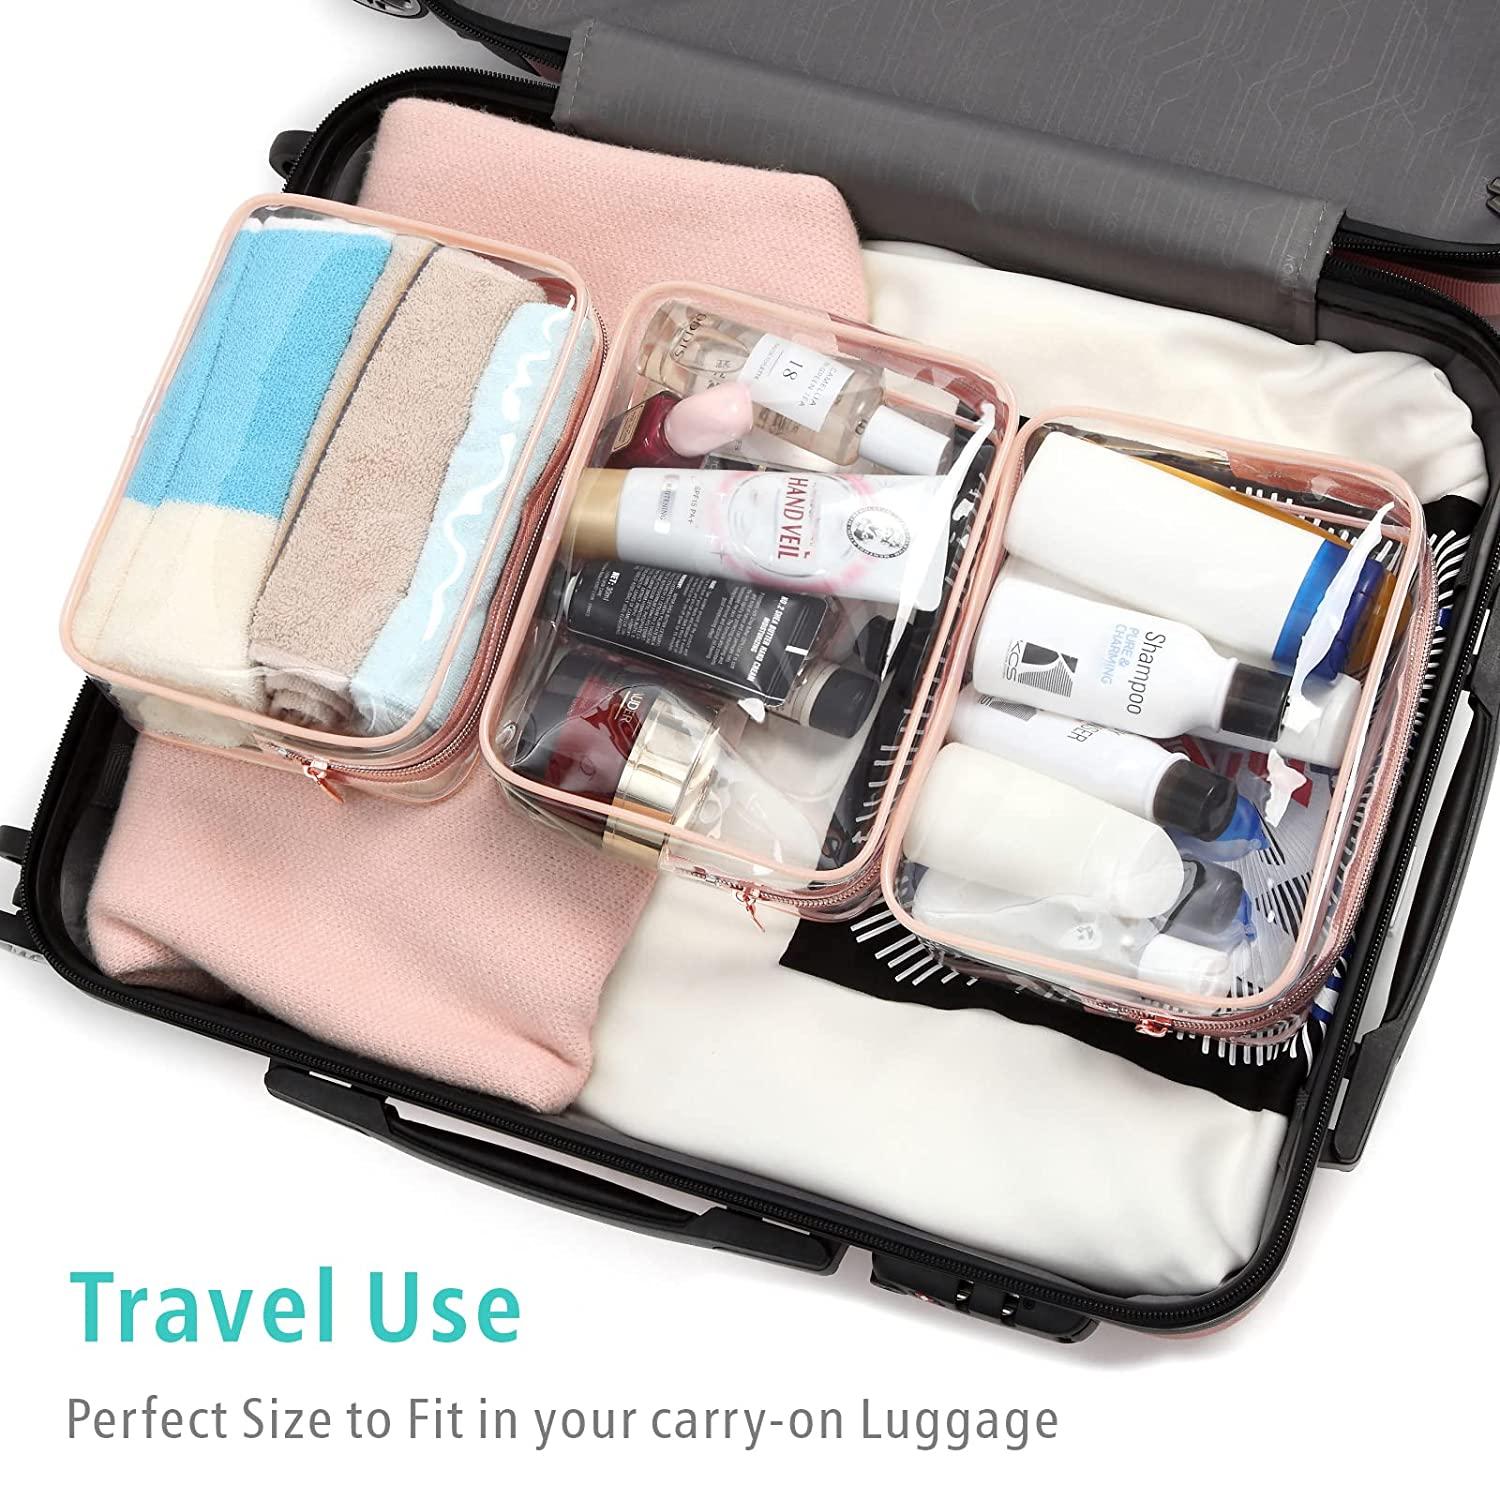 5 clear toiletry bags for travel with carry-ons that are TSA